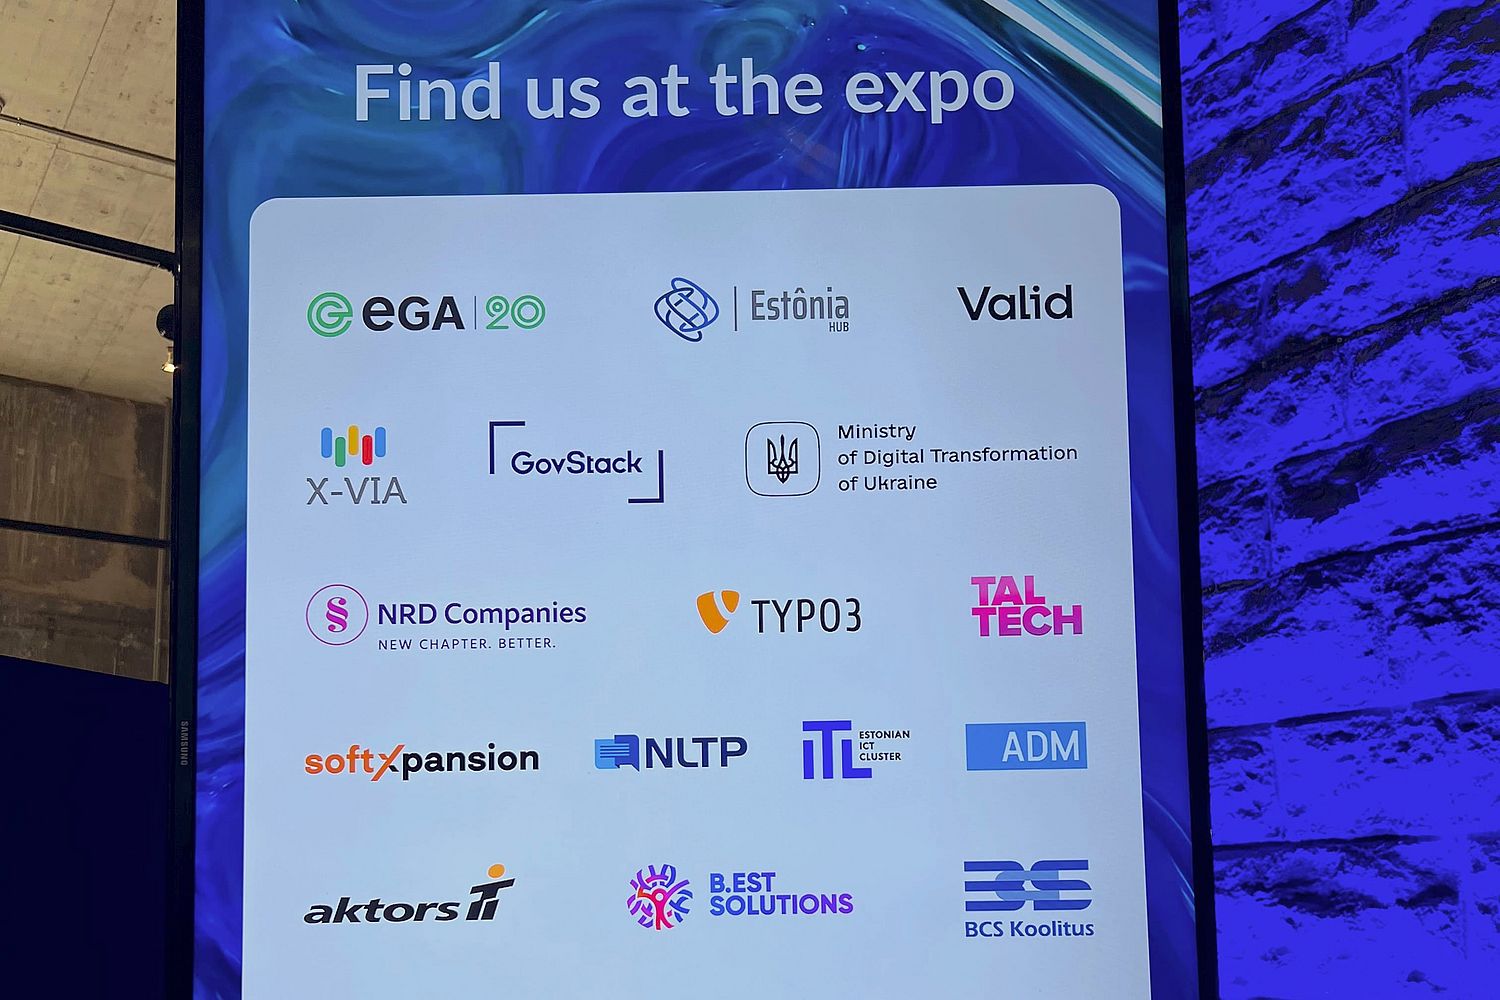 Display with logos and the title "Find us at the expo".